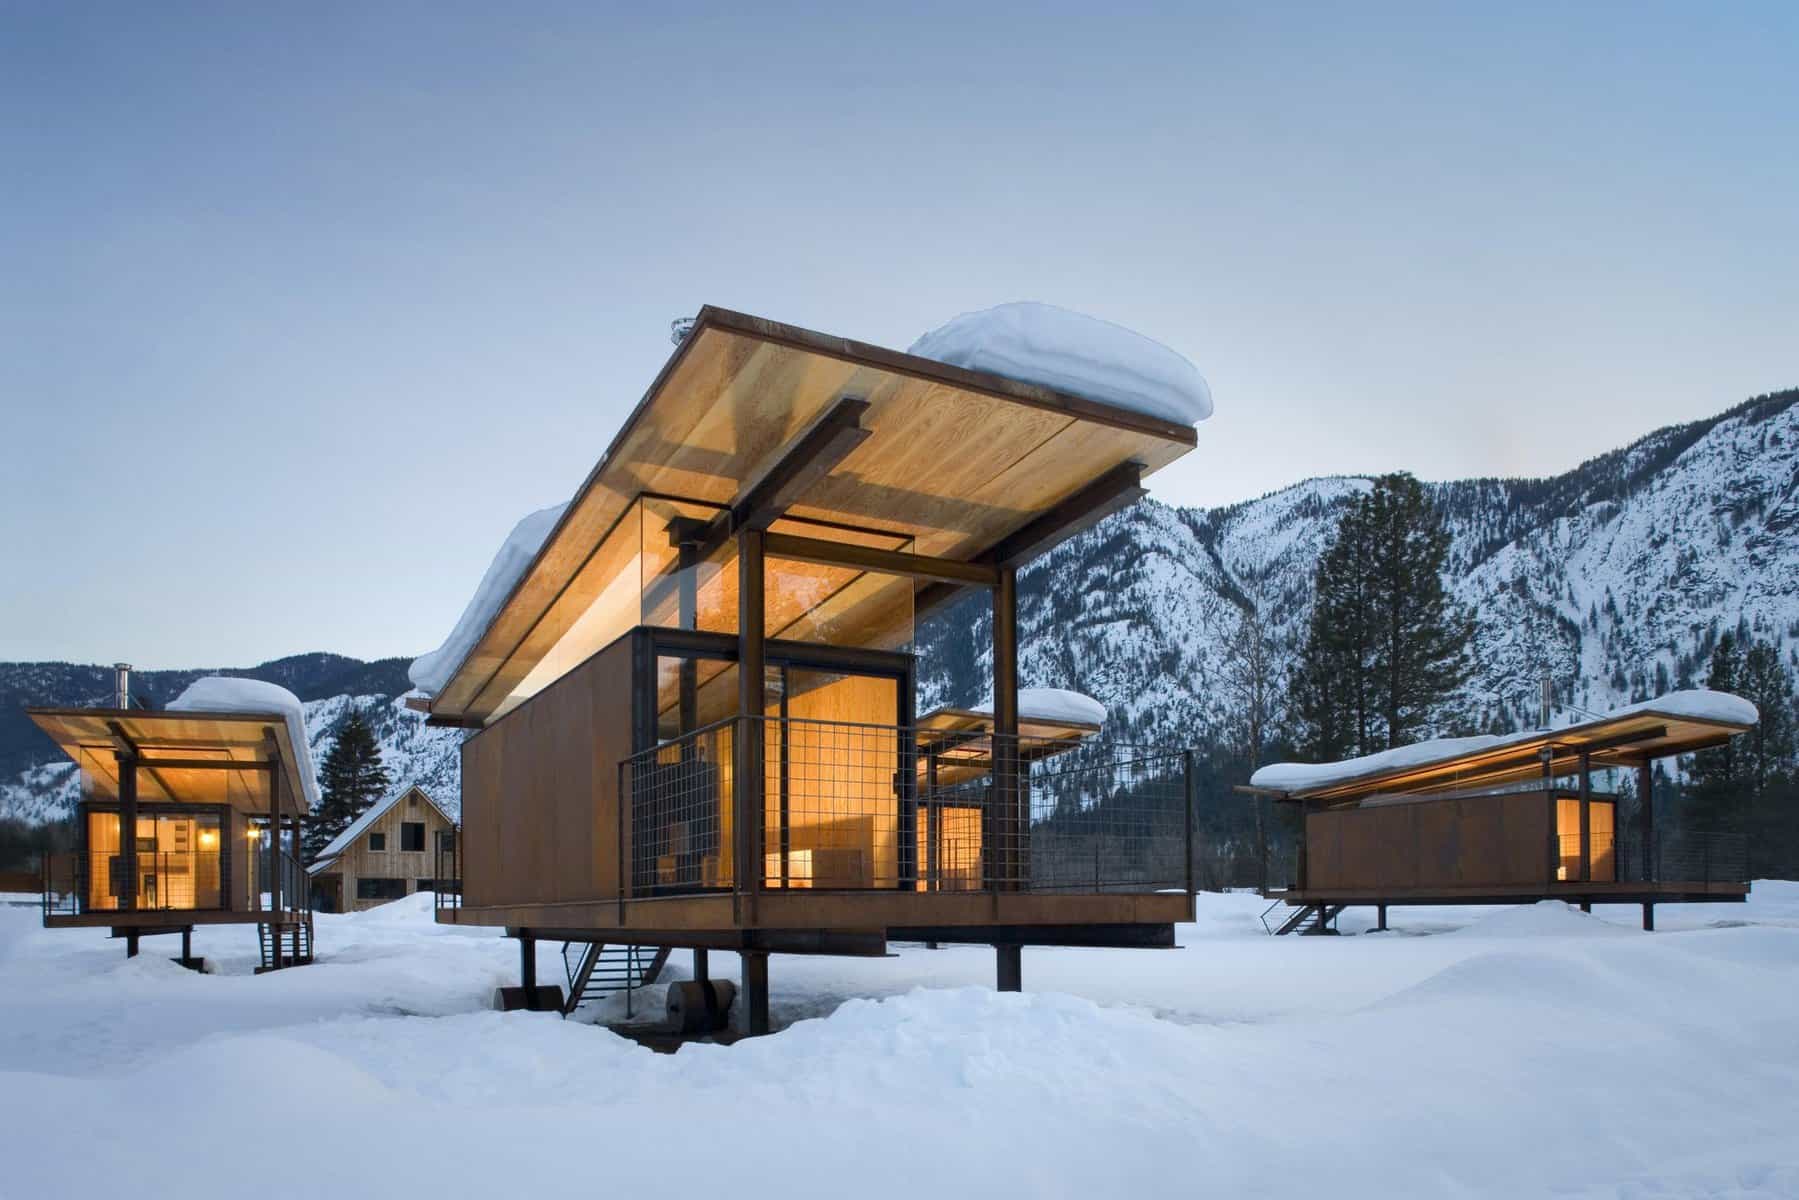 The Rolling Huts in Methow Valley